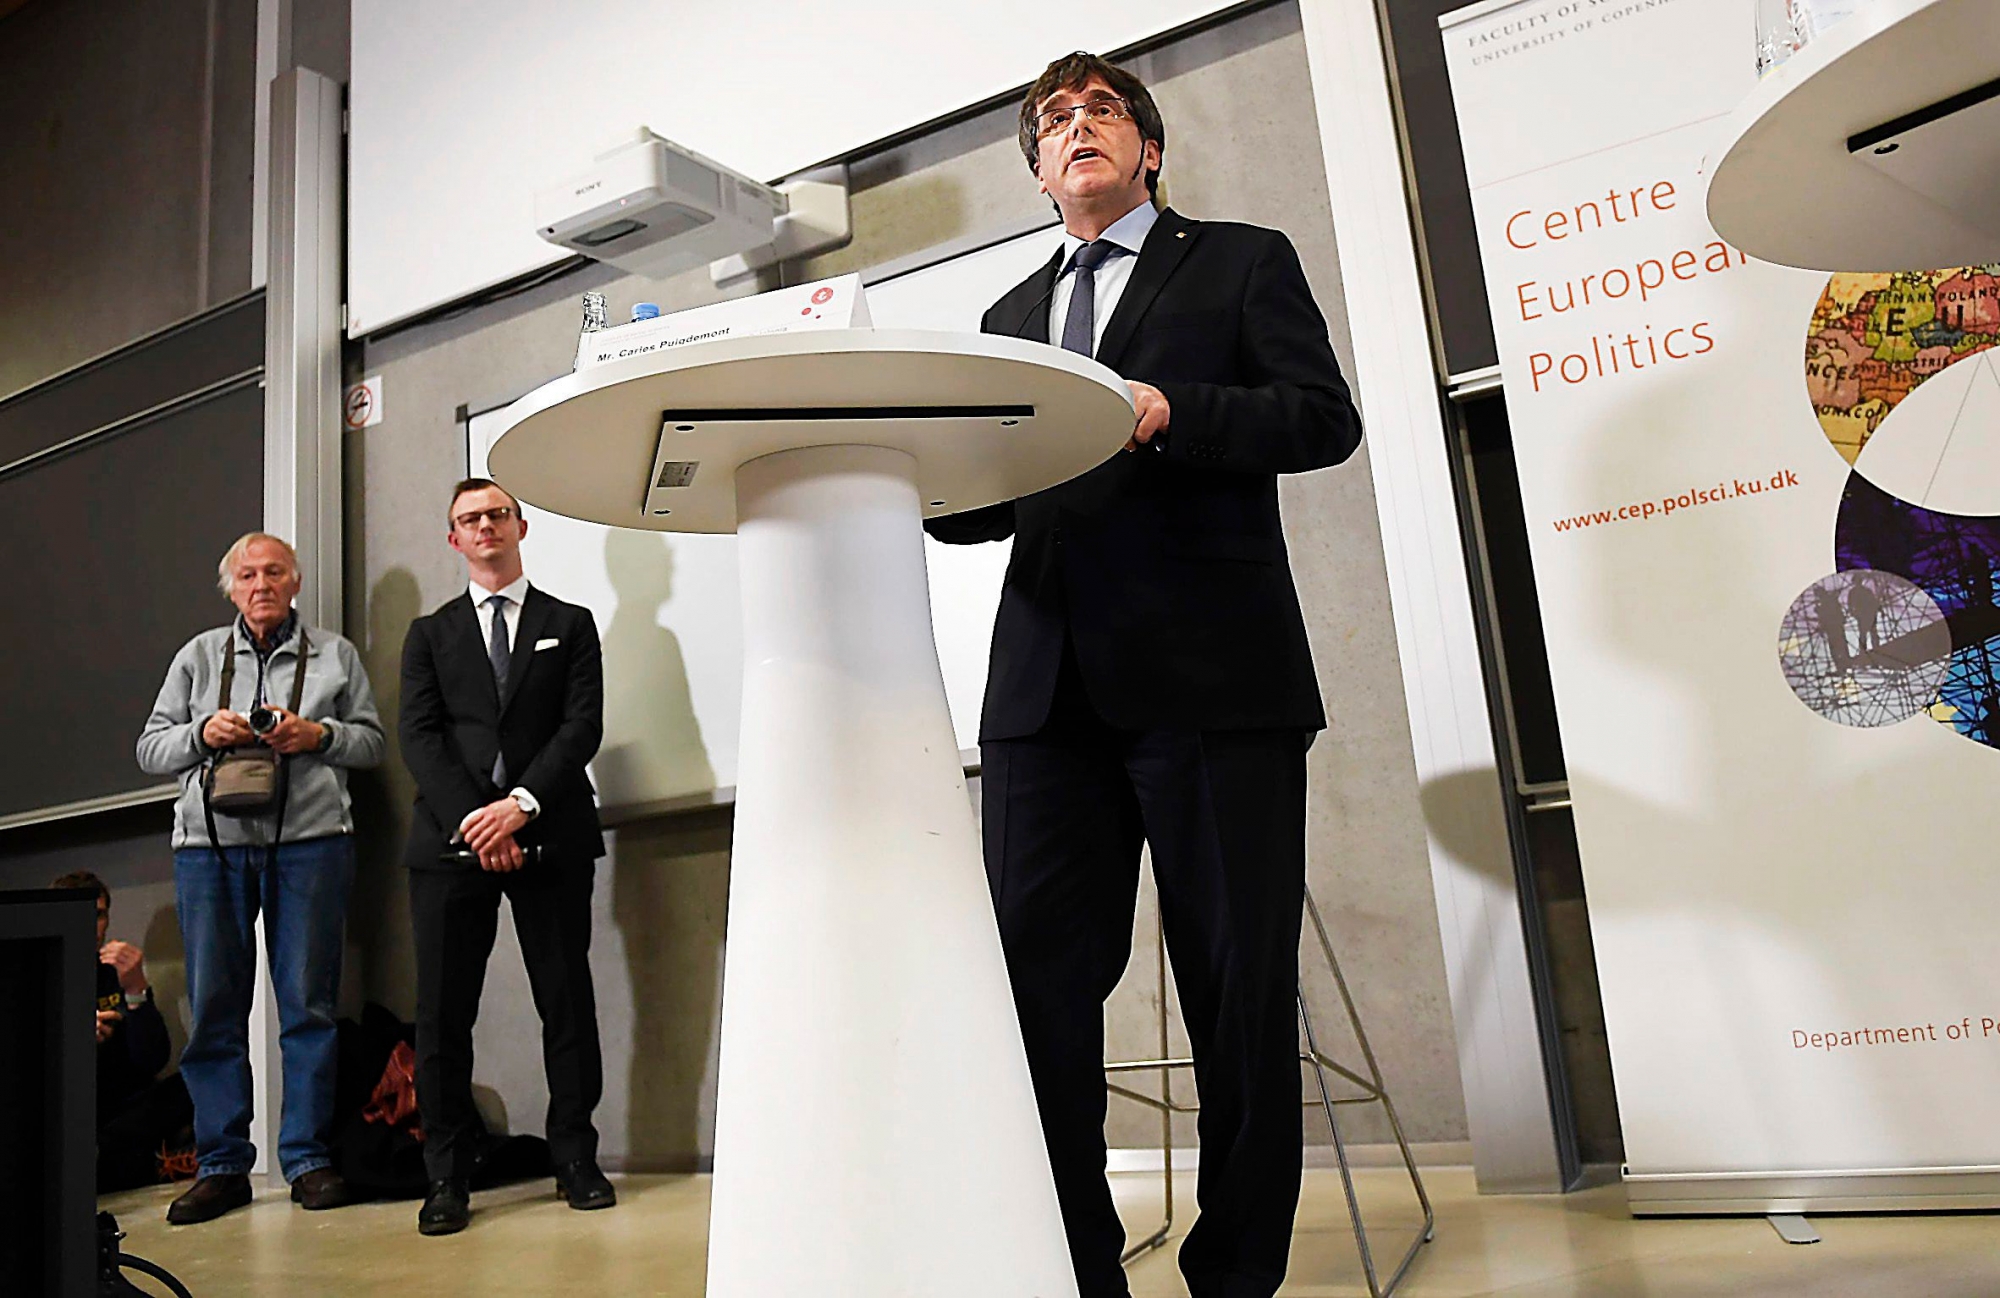 epa06465278 Former Catalan President Carles Puigdemont takes part in a debate at The Political Science Department at the University of Copenhagen in Copenhagen, Denamrk, 22 January 2018. Mr Puigdemont will discuss the current political situation in Catalonia and place the challenges that Catalonia faces in the European context. The Spanish state prosecutor office announced a day earlier that it will issue a European arrest warrent if the former Catalonian President left Beligum, which he is in exhile since the failed secession referendum for Catalonia in October 2017.  EPA/TARIQ MIKKEL KHAN  DENMARK OUT DENMARK CATALONIA PUIGDEMONT